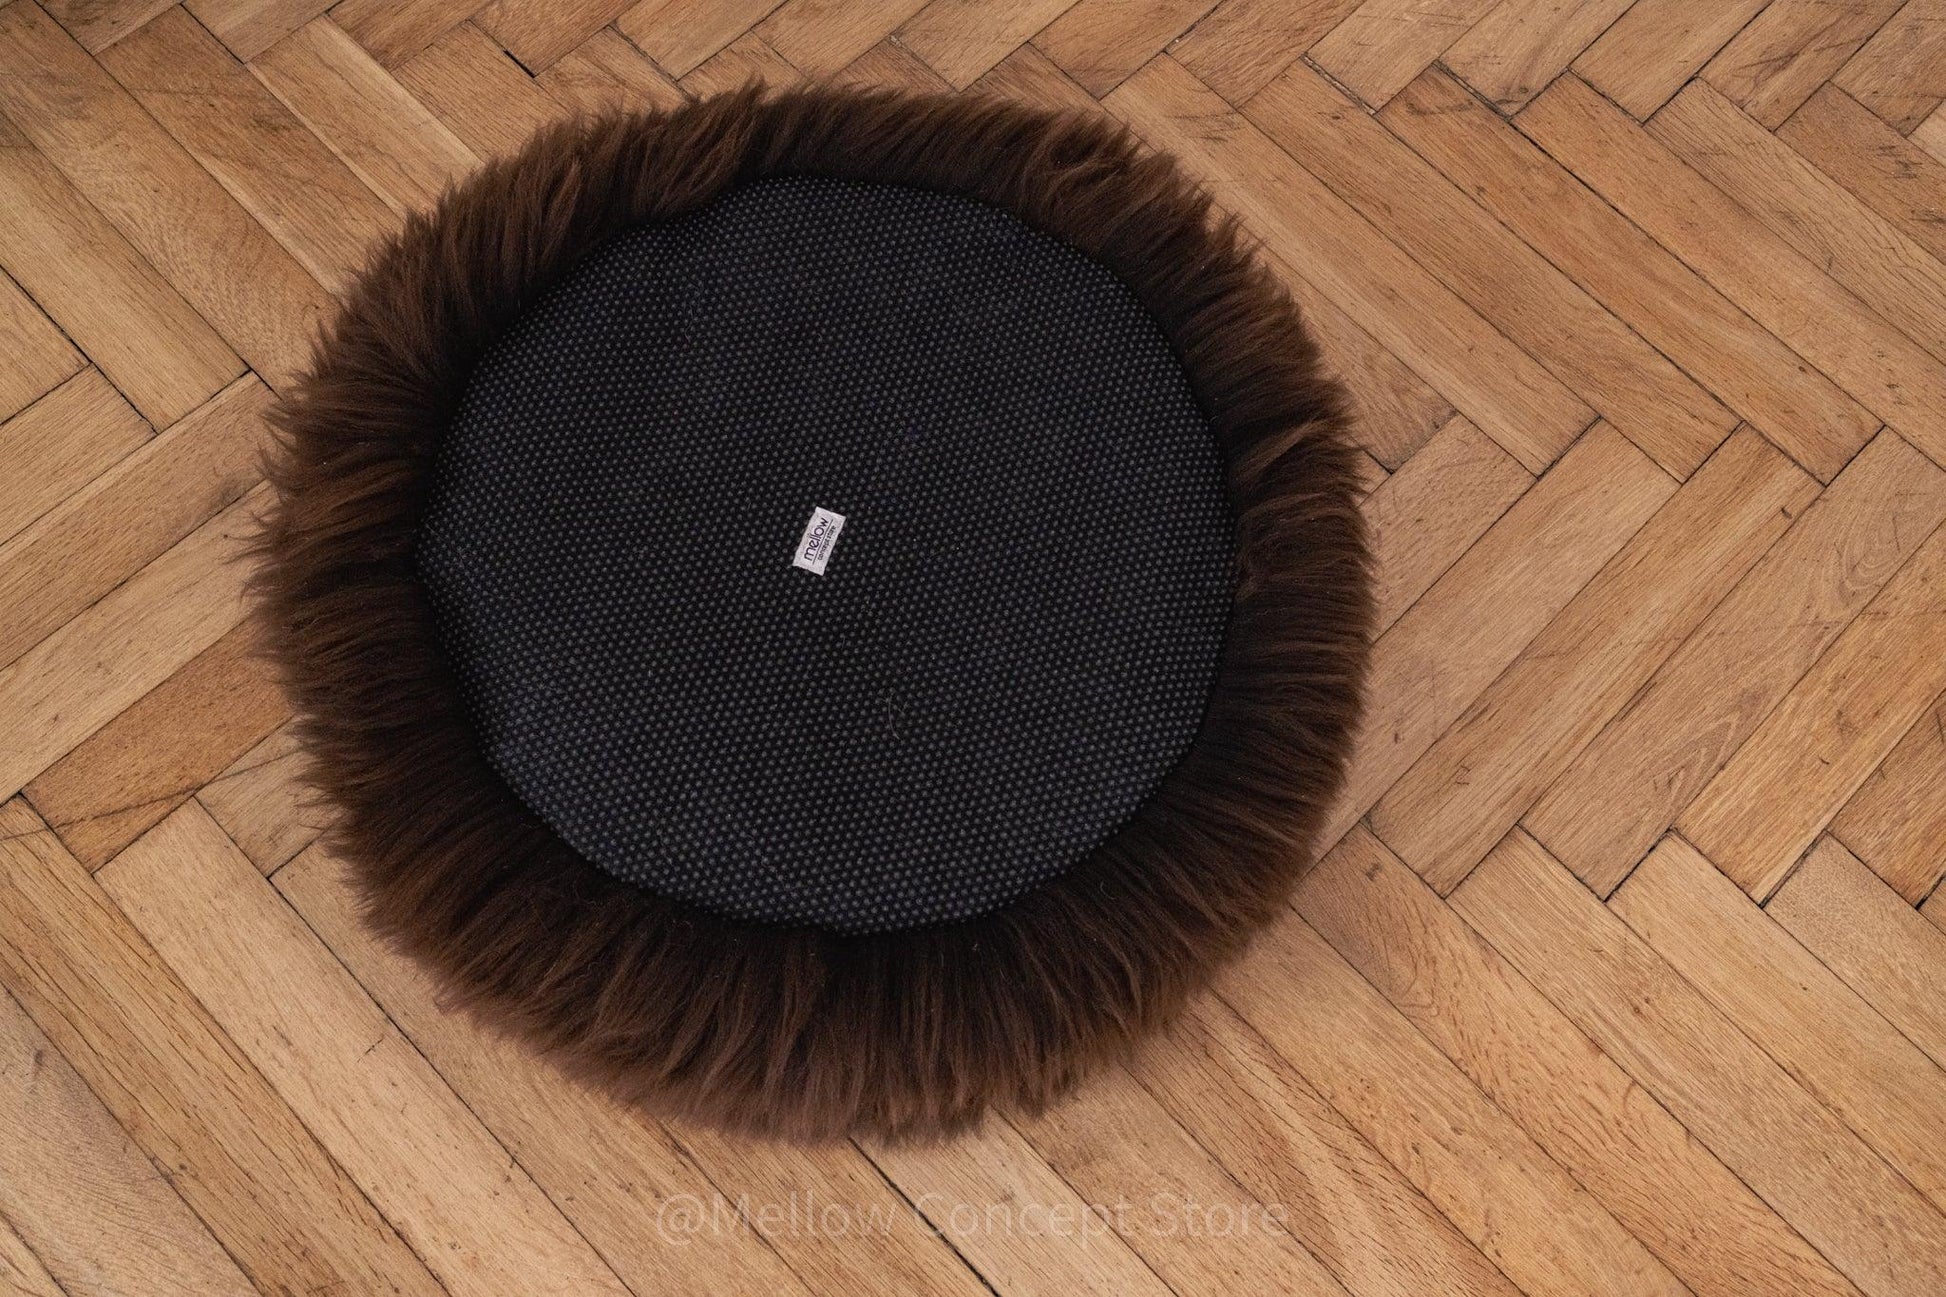 A black fur ball lounging on a wooden floor with Round Natural Sheepskin Pet Bed in Brown from Mellow Pet Store nearby.